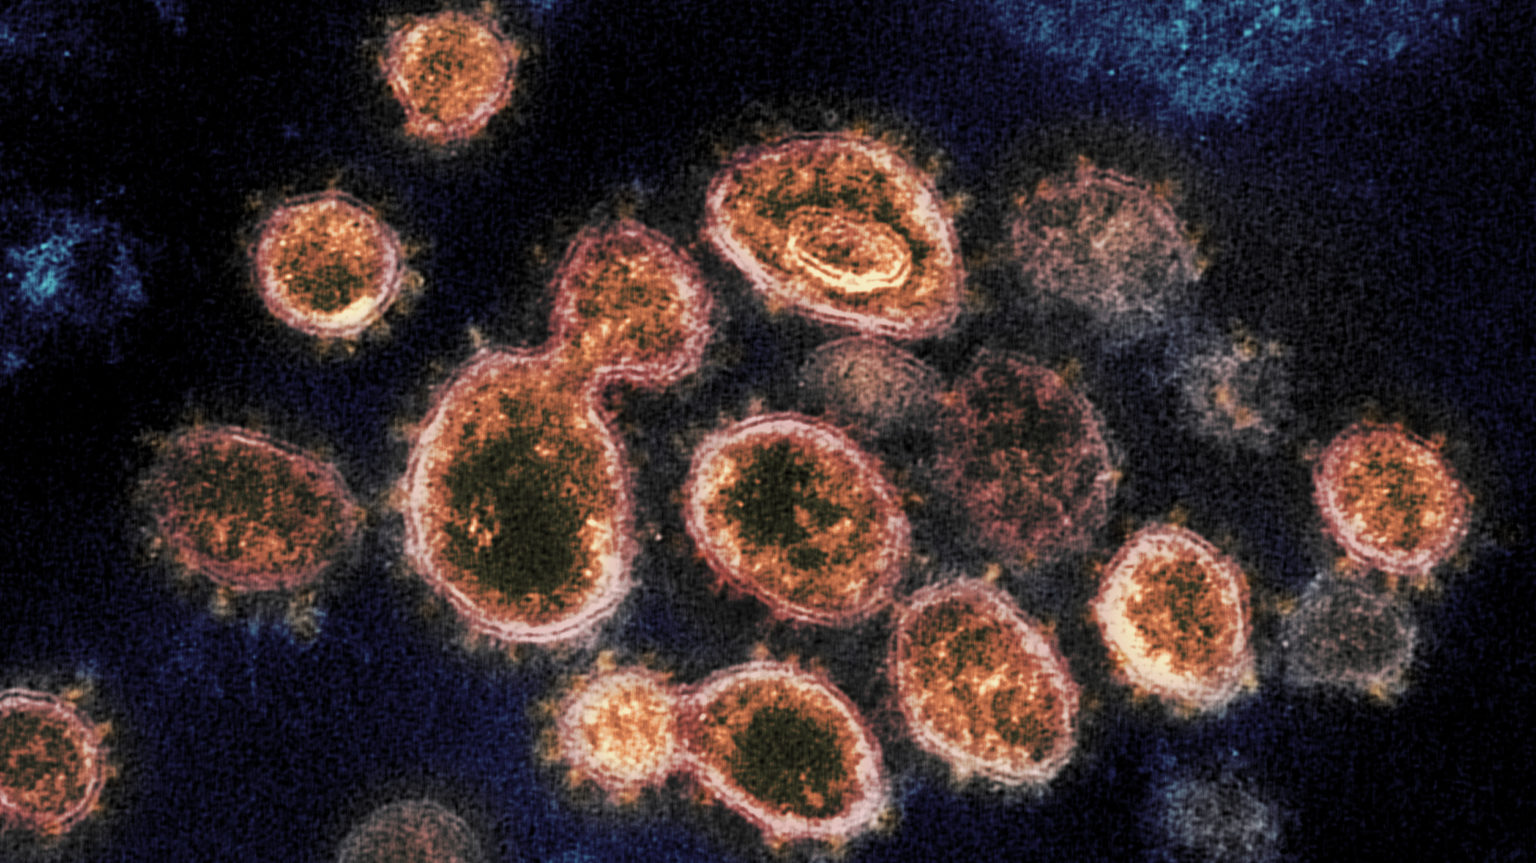 This transmission electron microscope image shows SARS-CoV-2, the virus that causes COVID-19, isolated from a patient in the U.S. Virus particles are shown emerging from the surface of cells cultured in the lab. The spikes on the outer edge of the virus particles give coronaviruses their name, crown-like. (Couresty: NIAID-RML)